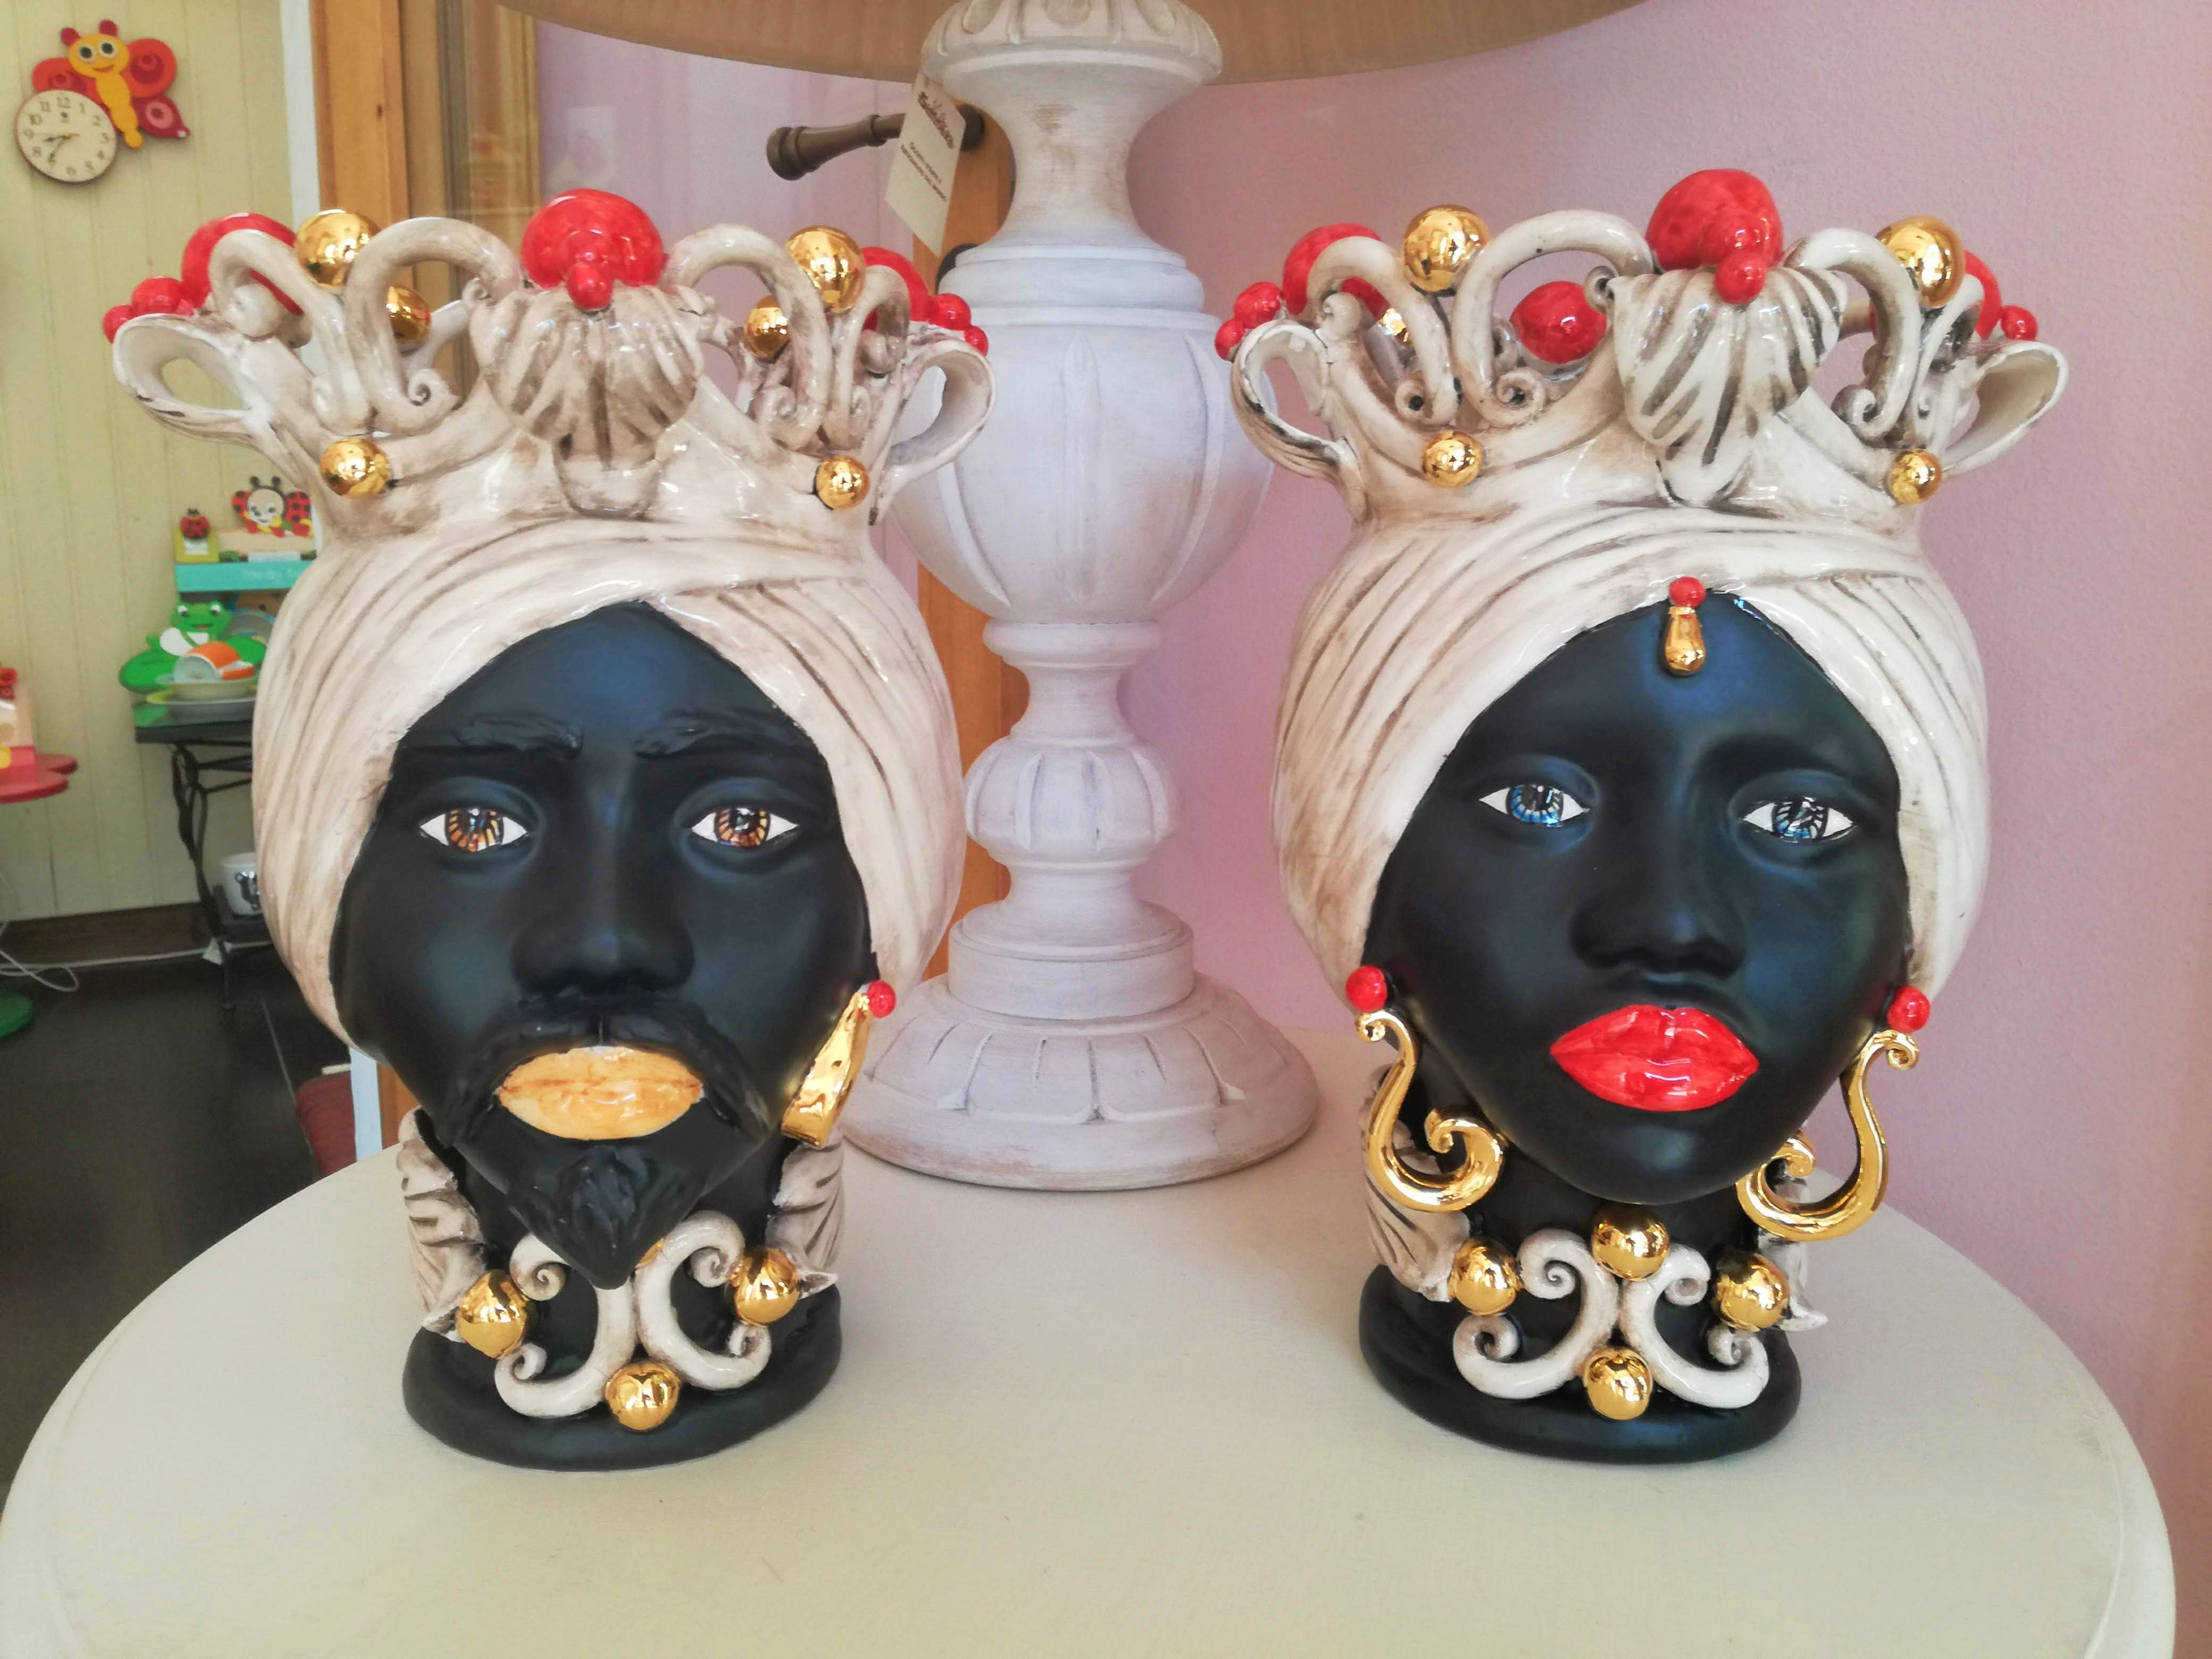 Pair of Moor's heads with red knobs